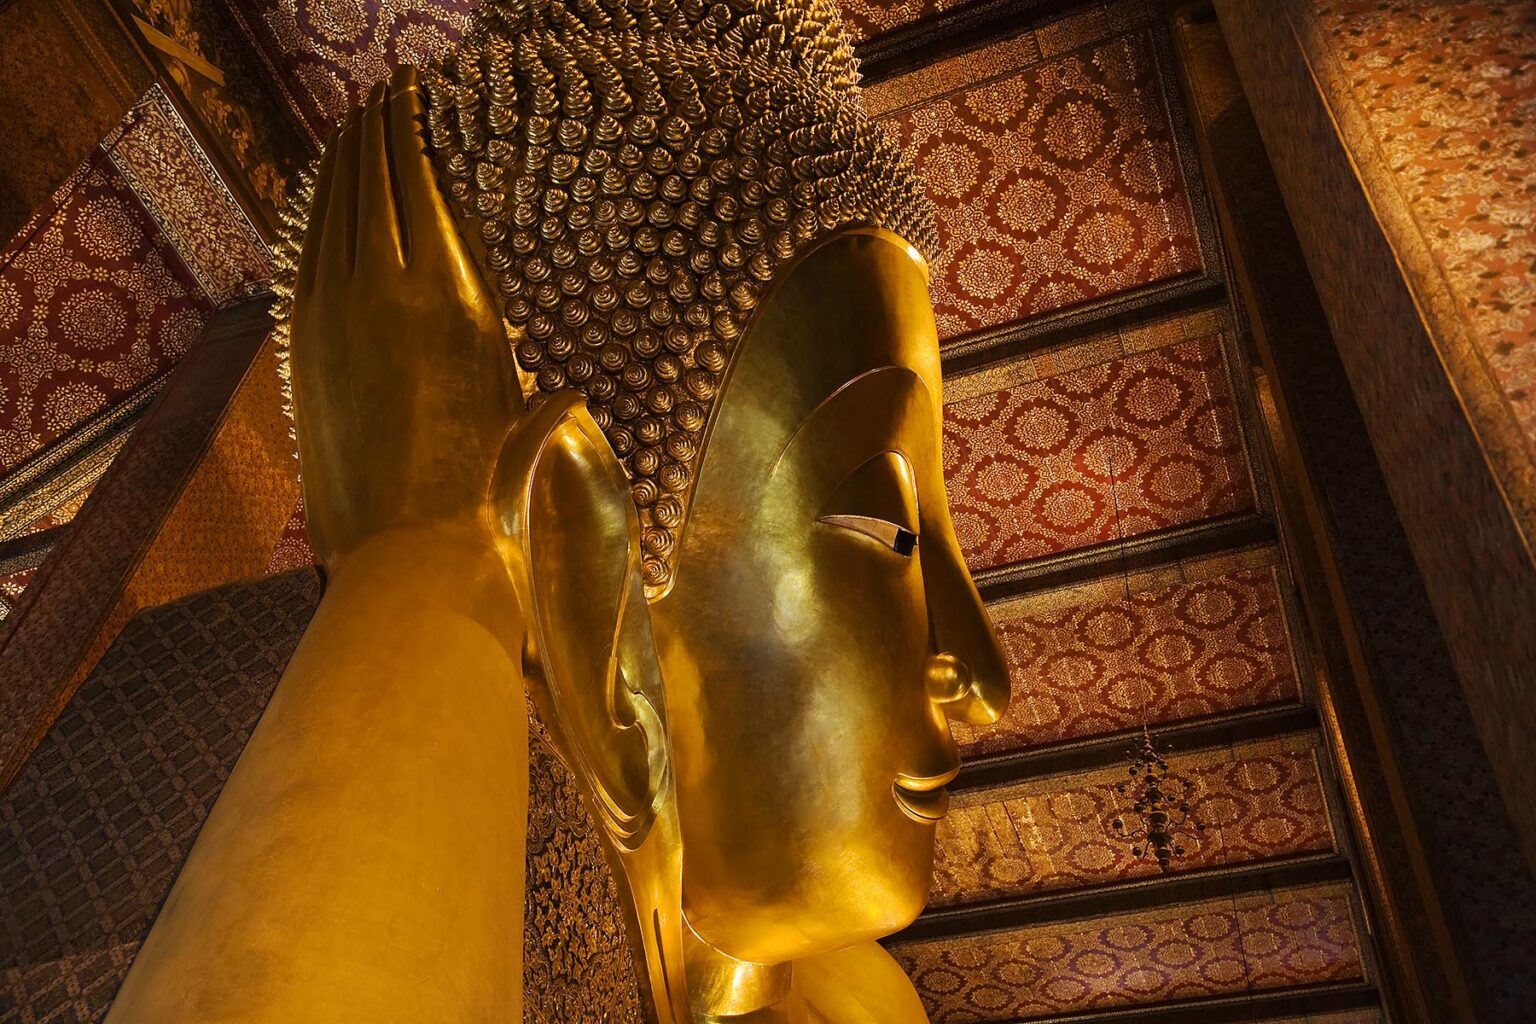 The gilded head of the largest RECLINING BUDDHA in THAILAND (46 meters long) which is found at the THERAVADA BUDDHIST TEMPLE of WAT PO - BANGKOK, THAILAND